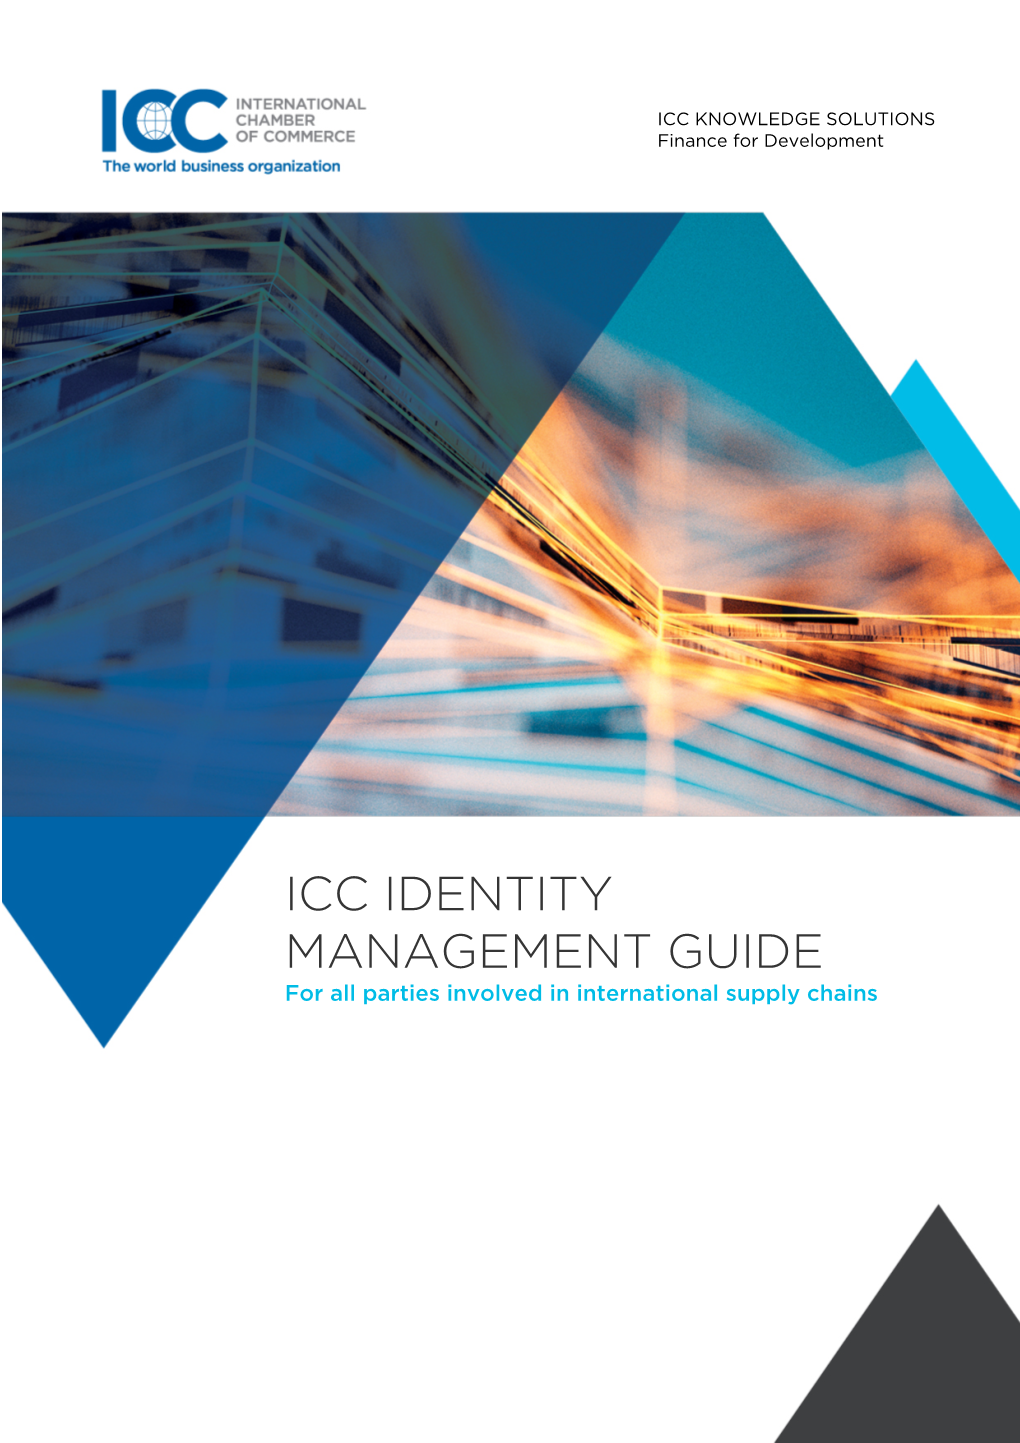 ICC IDENTITY MANAGEMENT GUIDE for All Parties Involved in International Supply Chains 1